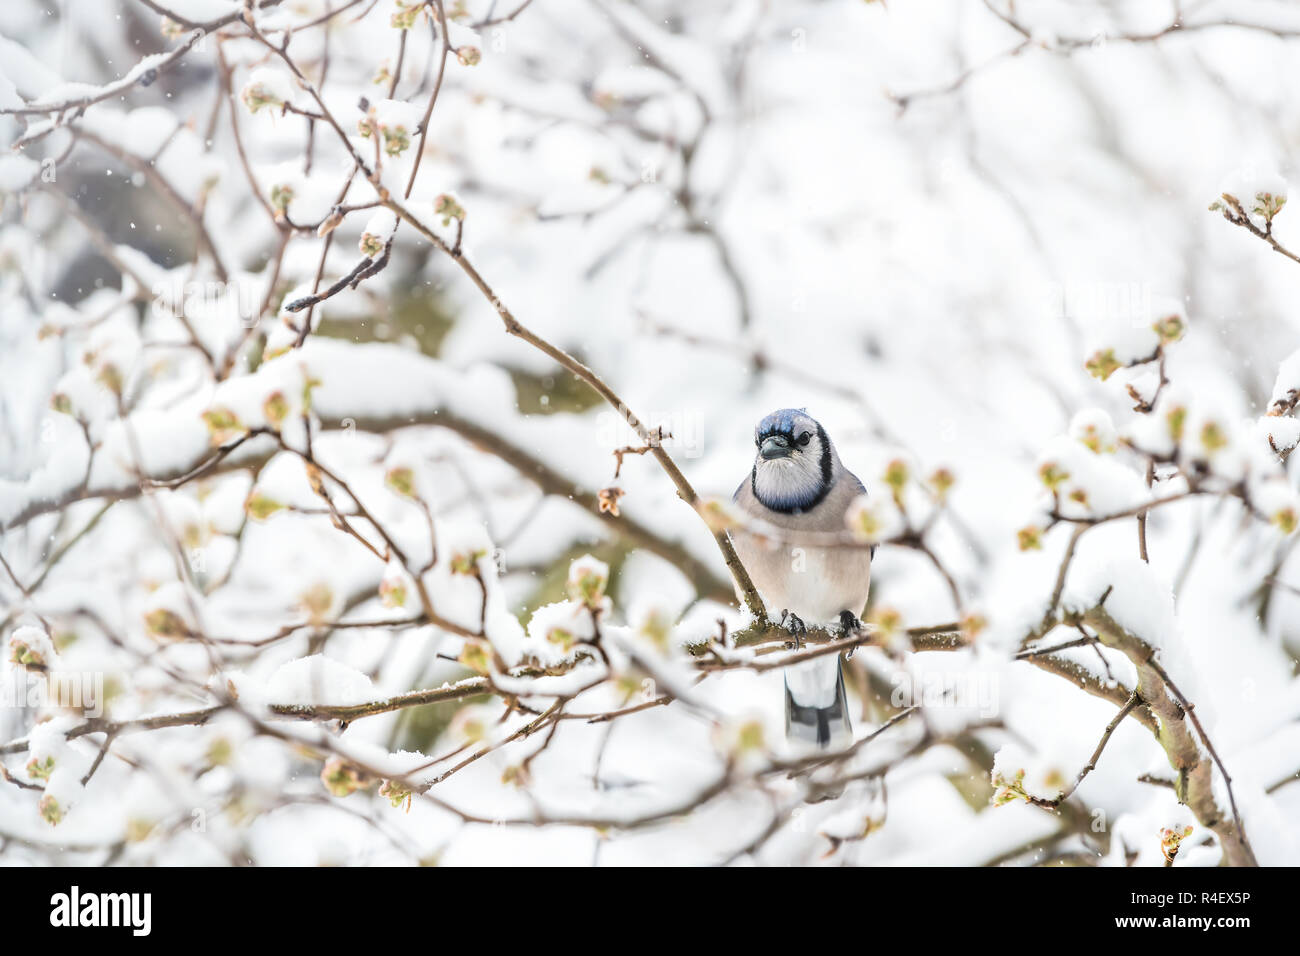 Closeup of fluffed, puffed up blue jay bird, looking angry, perched on sakura, cherry tree branch, covered in falling snow with buds, heavy snowing, c Stock Photo